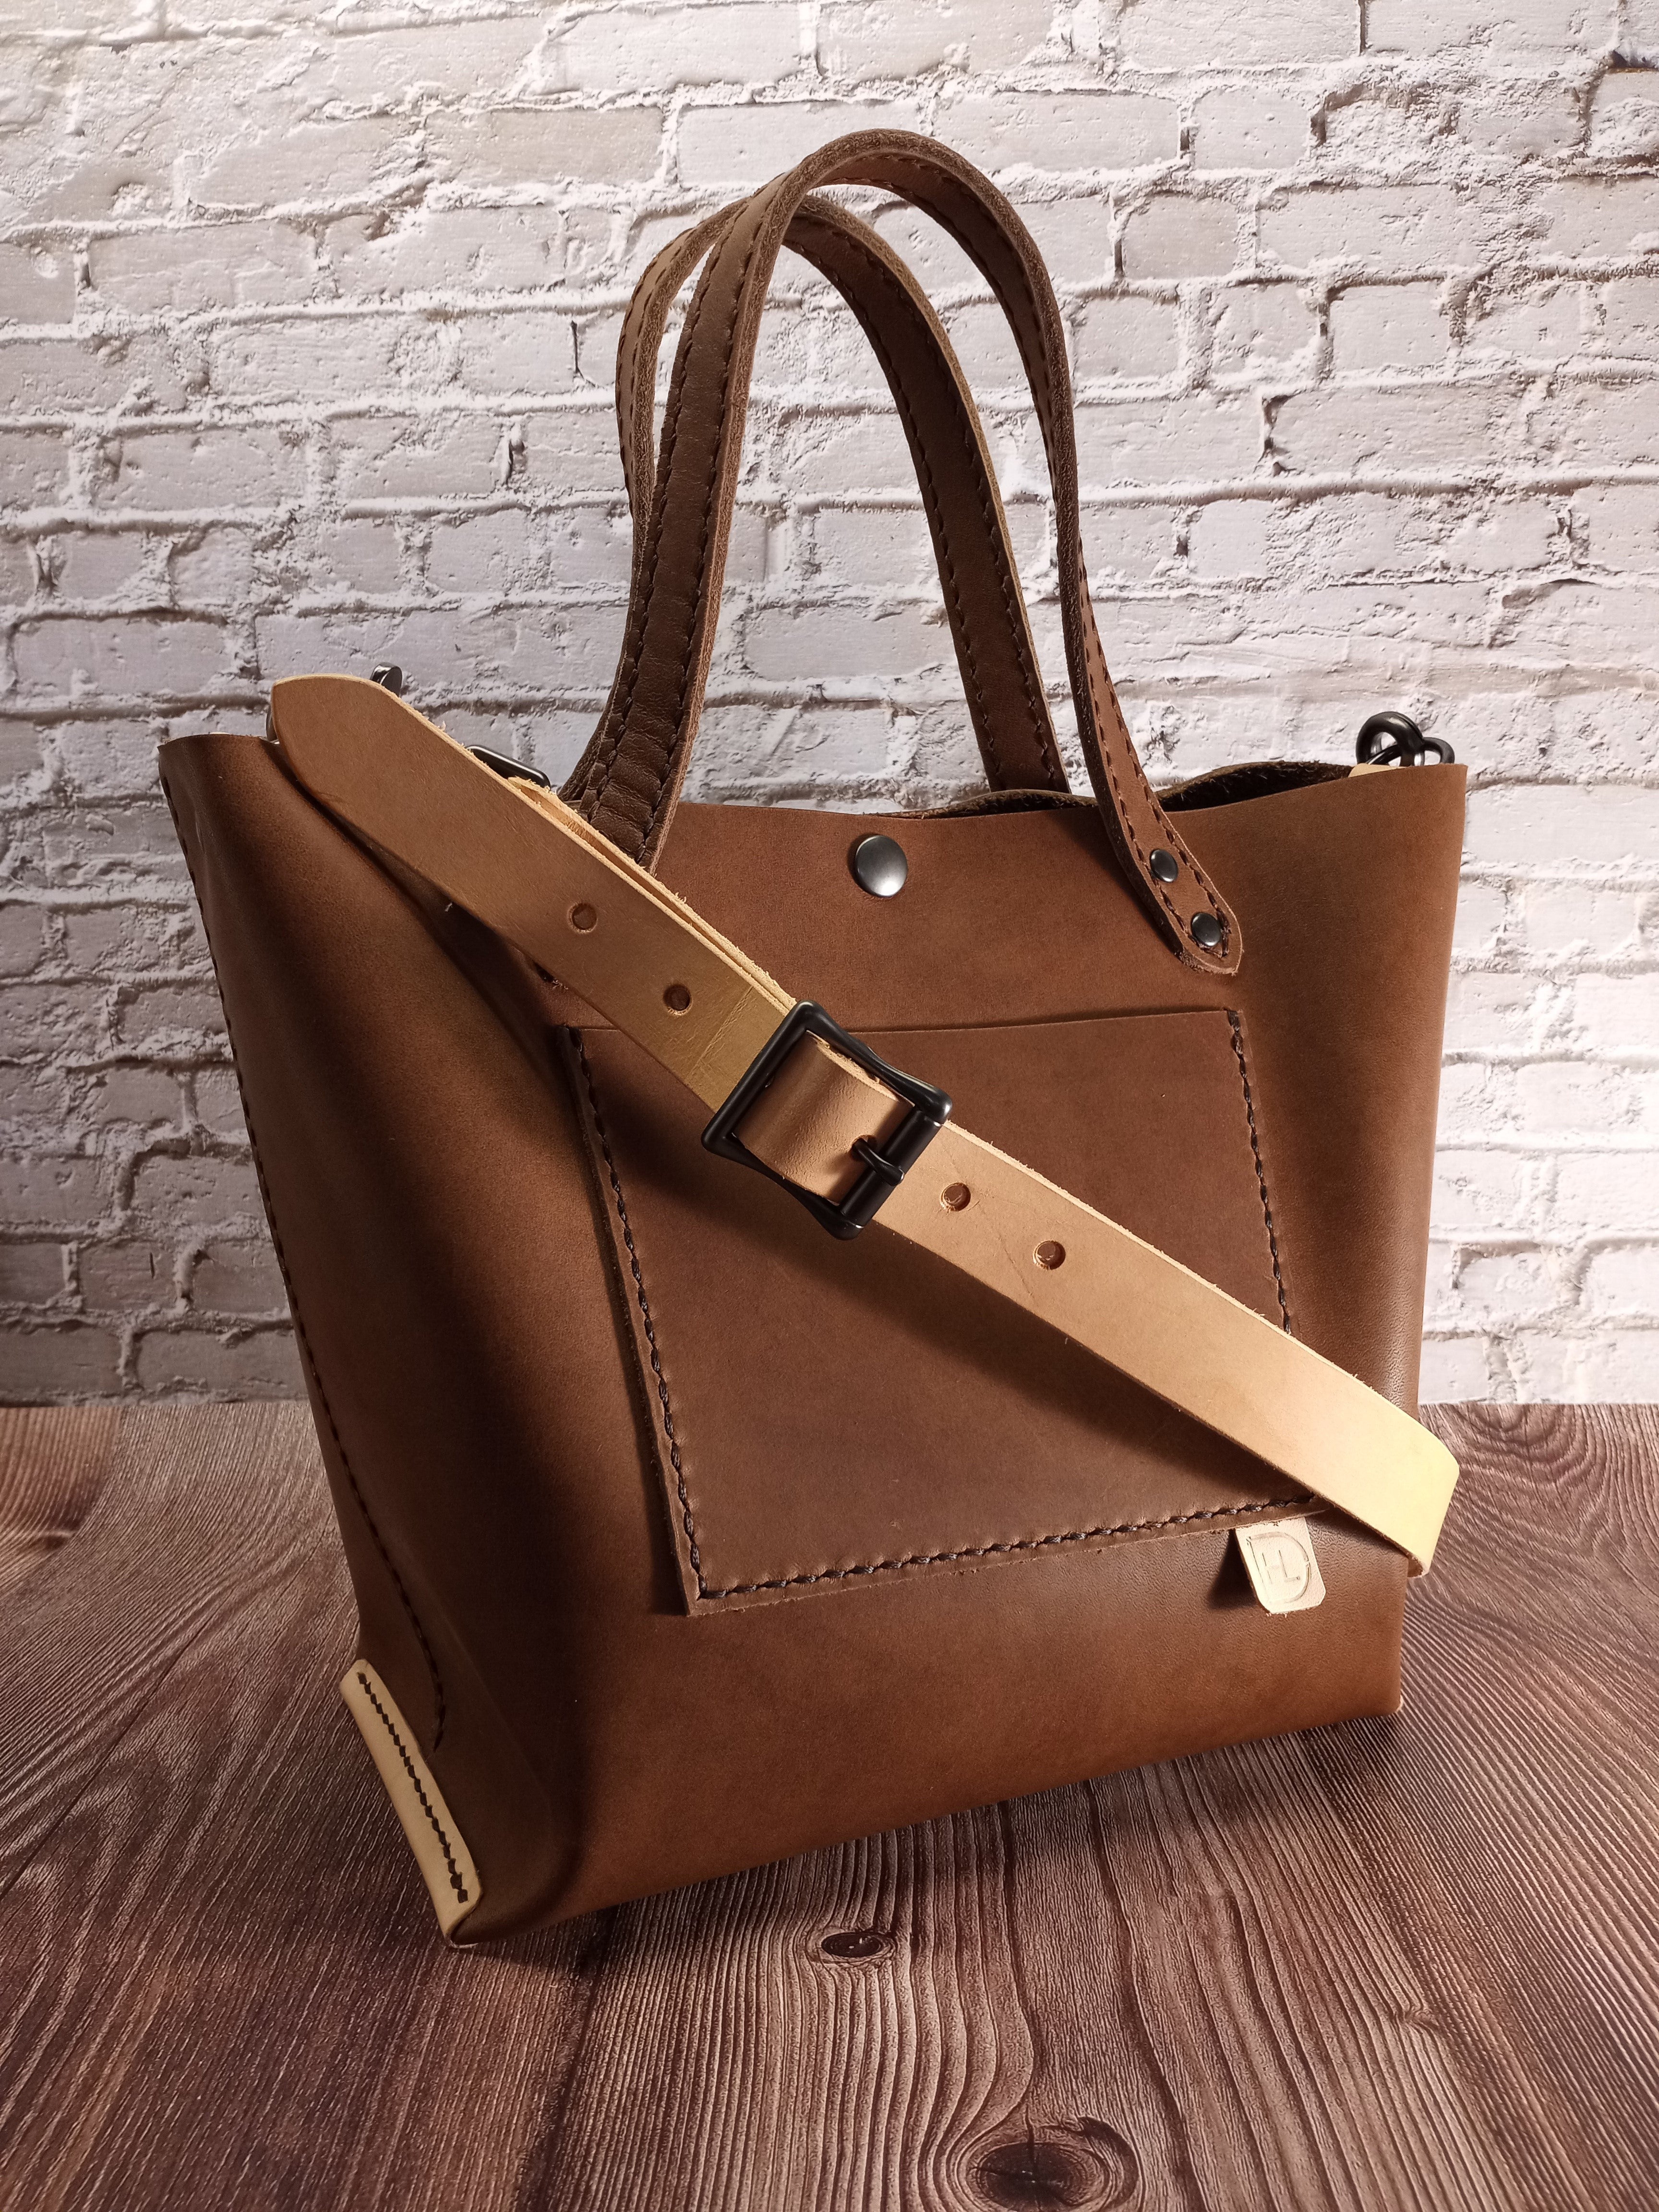 The Harper Bag In Antique Brown - Ready to Ship